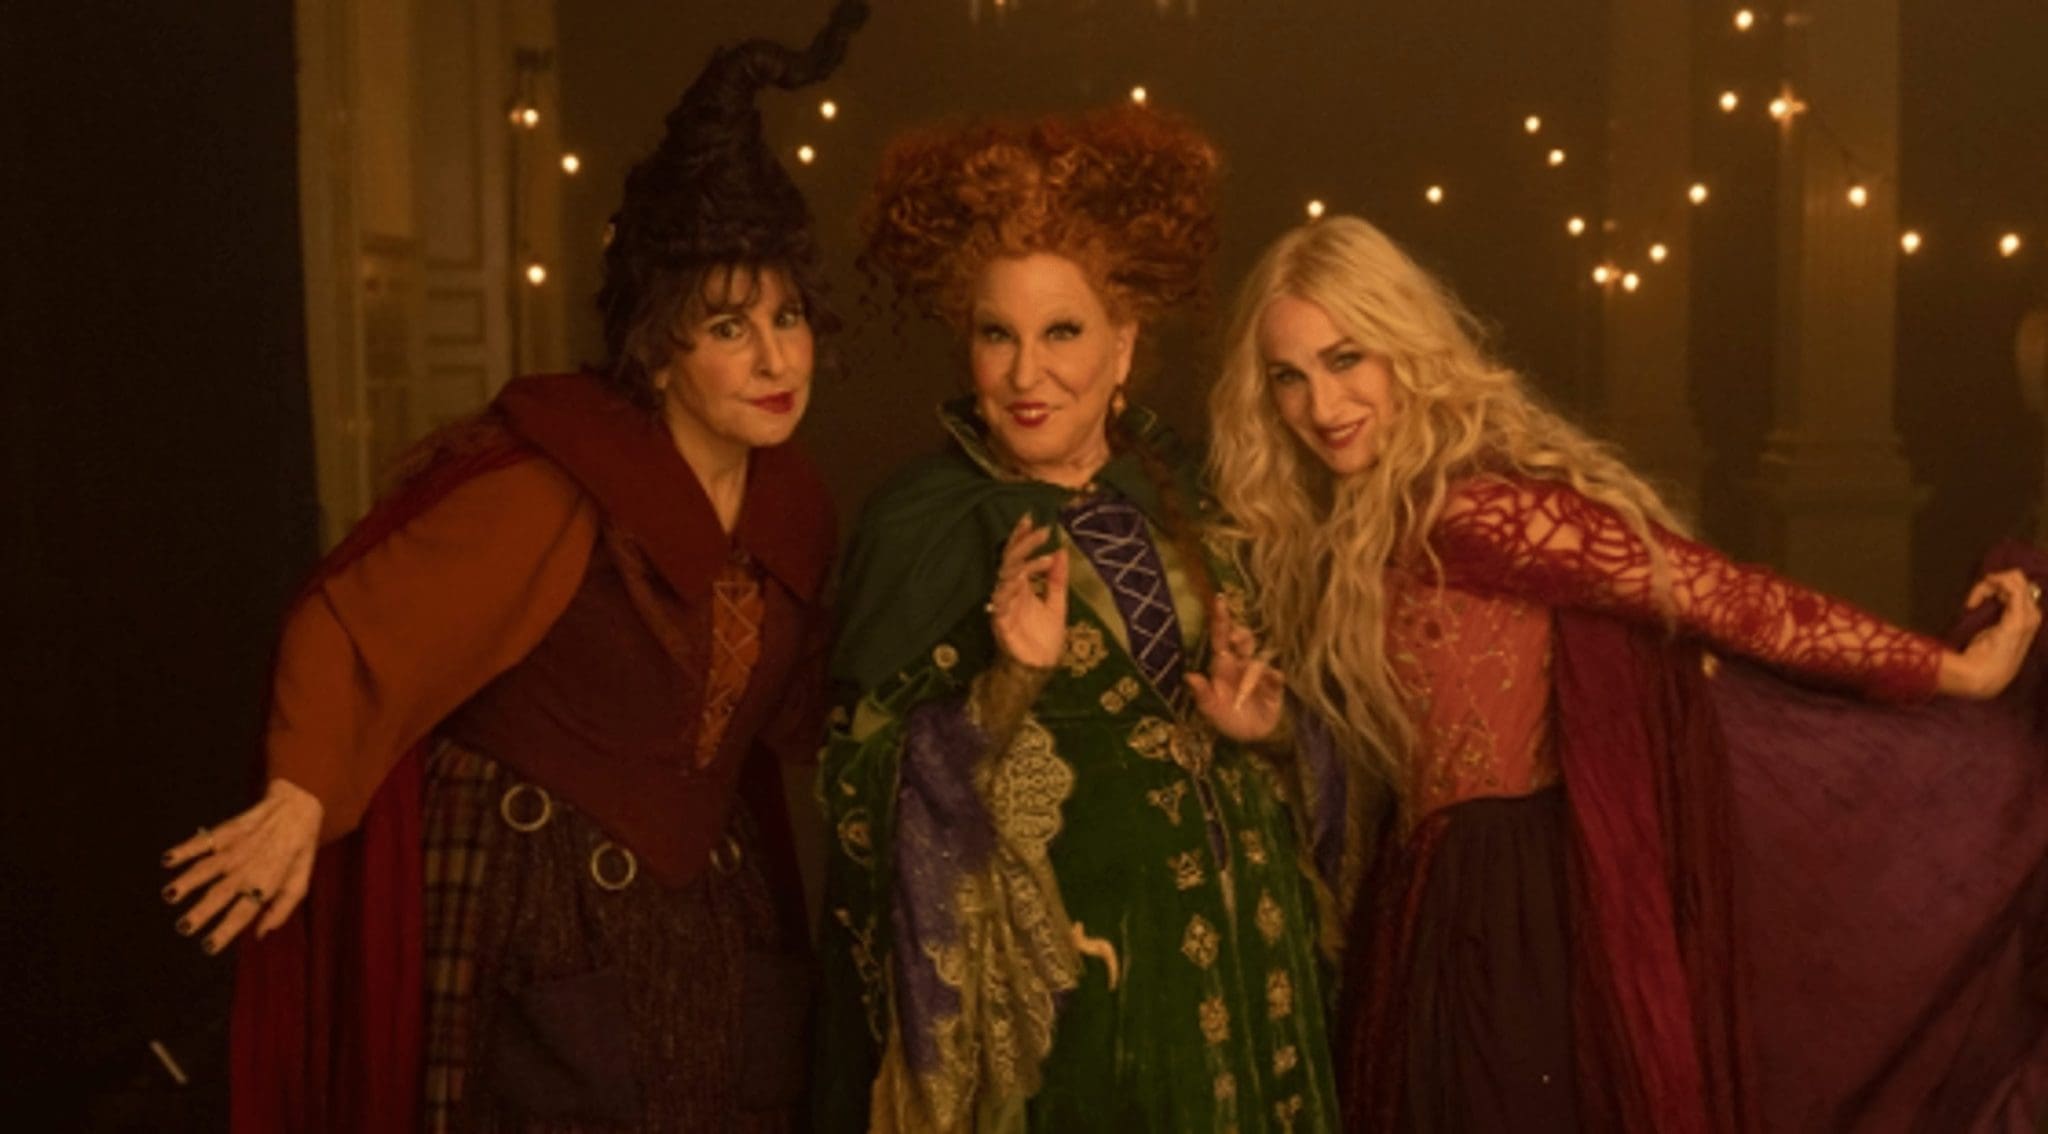 'Hocus Pocus 2' trailer released Bette Midler, Sarah Jessica Parker, and Kathy Najimy again play treacherous witches